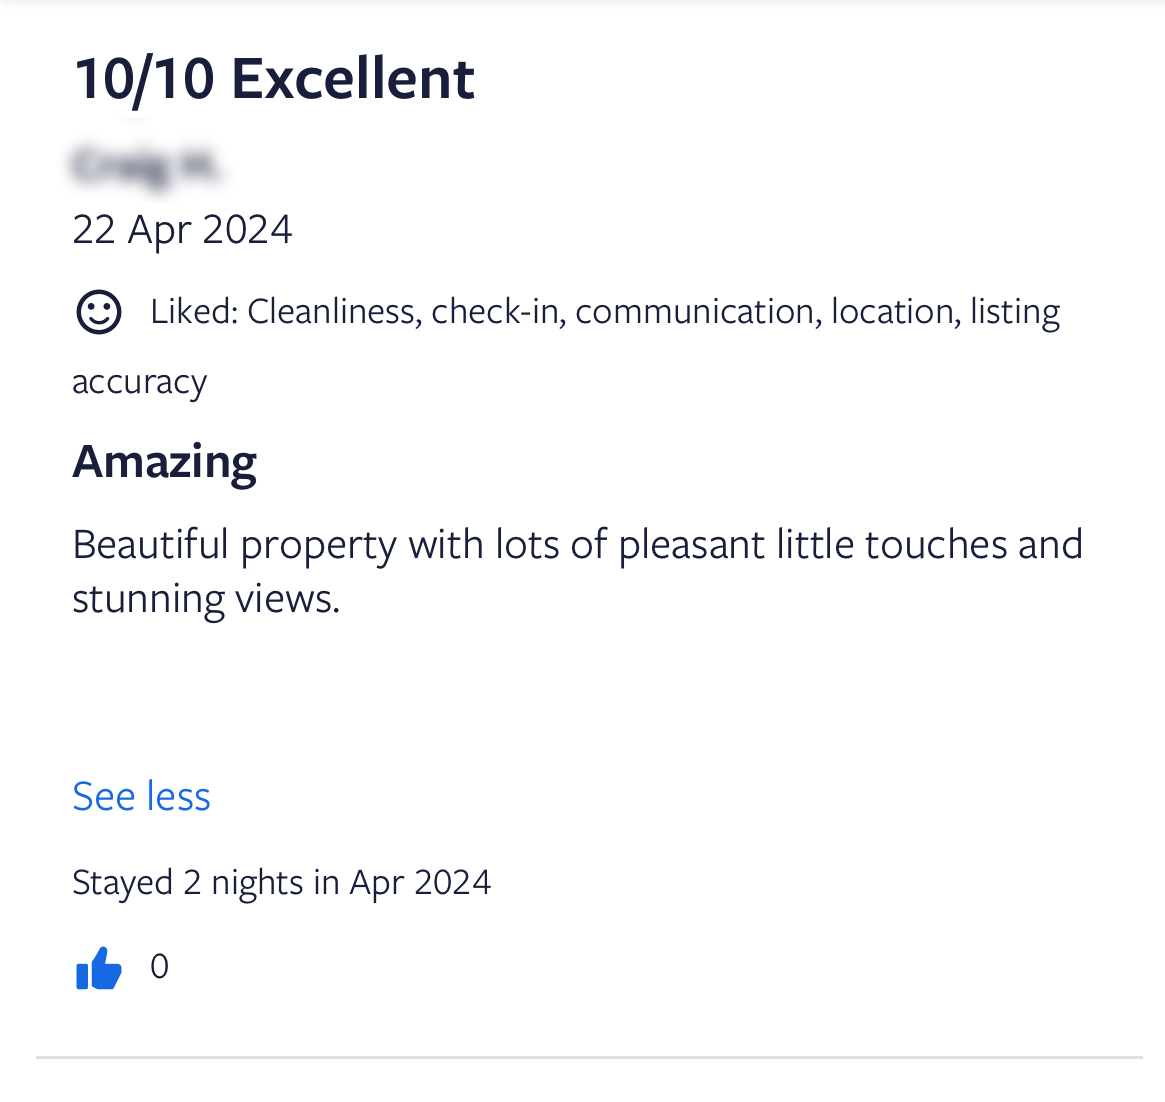 Another 10/10 Excellent! Amazing! Beautiful property with lots of pleasant little touches and stunning views. Another 'Excellent' review for Cragg View, our detached home on VRBO & AirBNB 🇬🇧 linktr.ee/craggview #lakedistrict #grangeoversands #accommodation #vrbo #airbnb